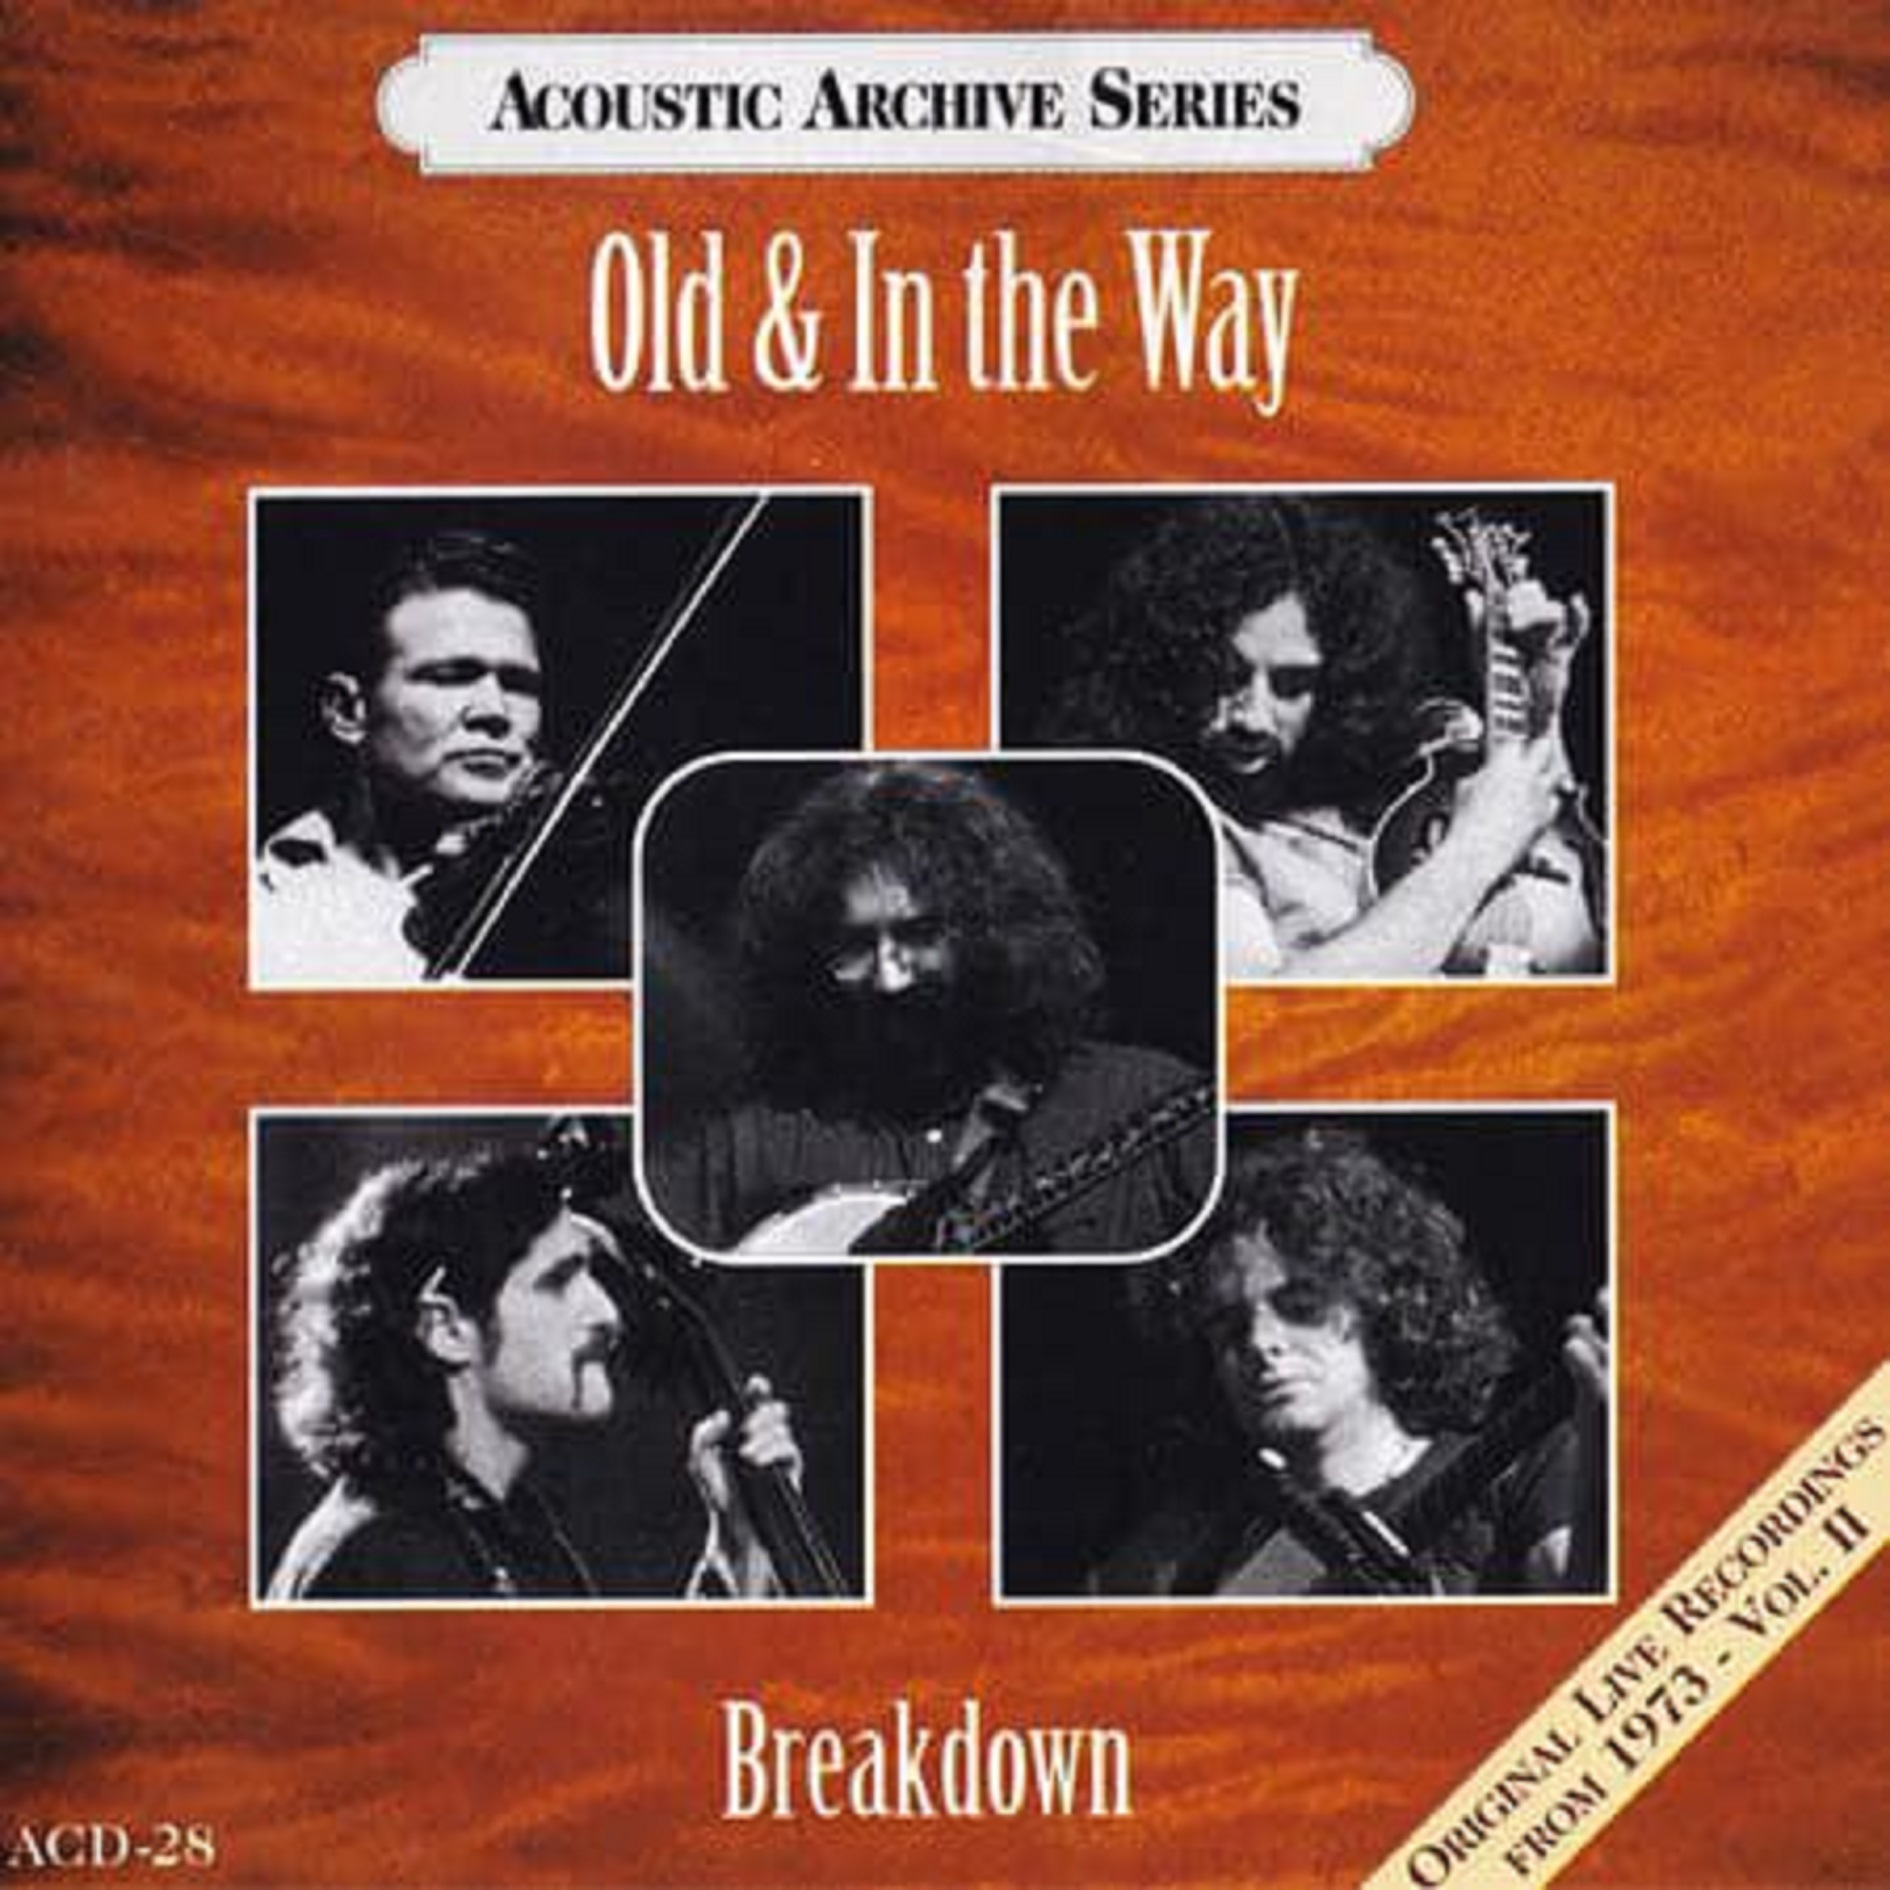 Acoustic Disc Celebrates Legendary Bluegrass with “Breakdown” by Old & In the Way